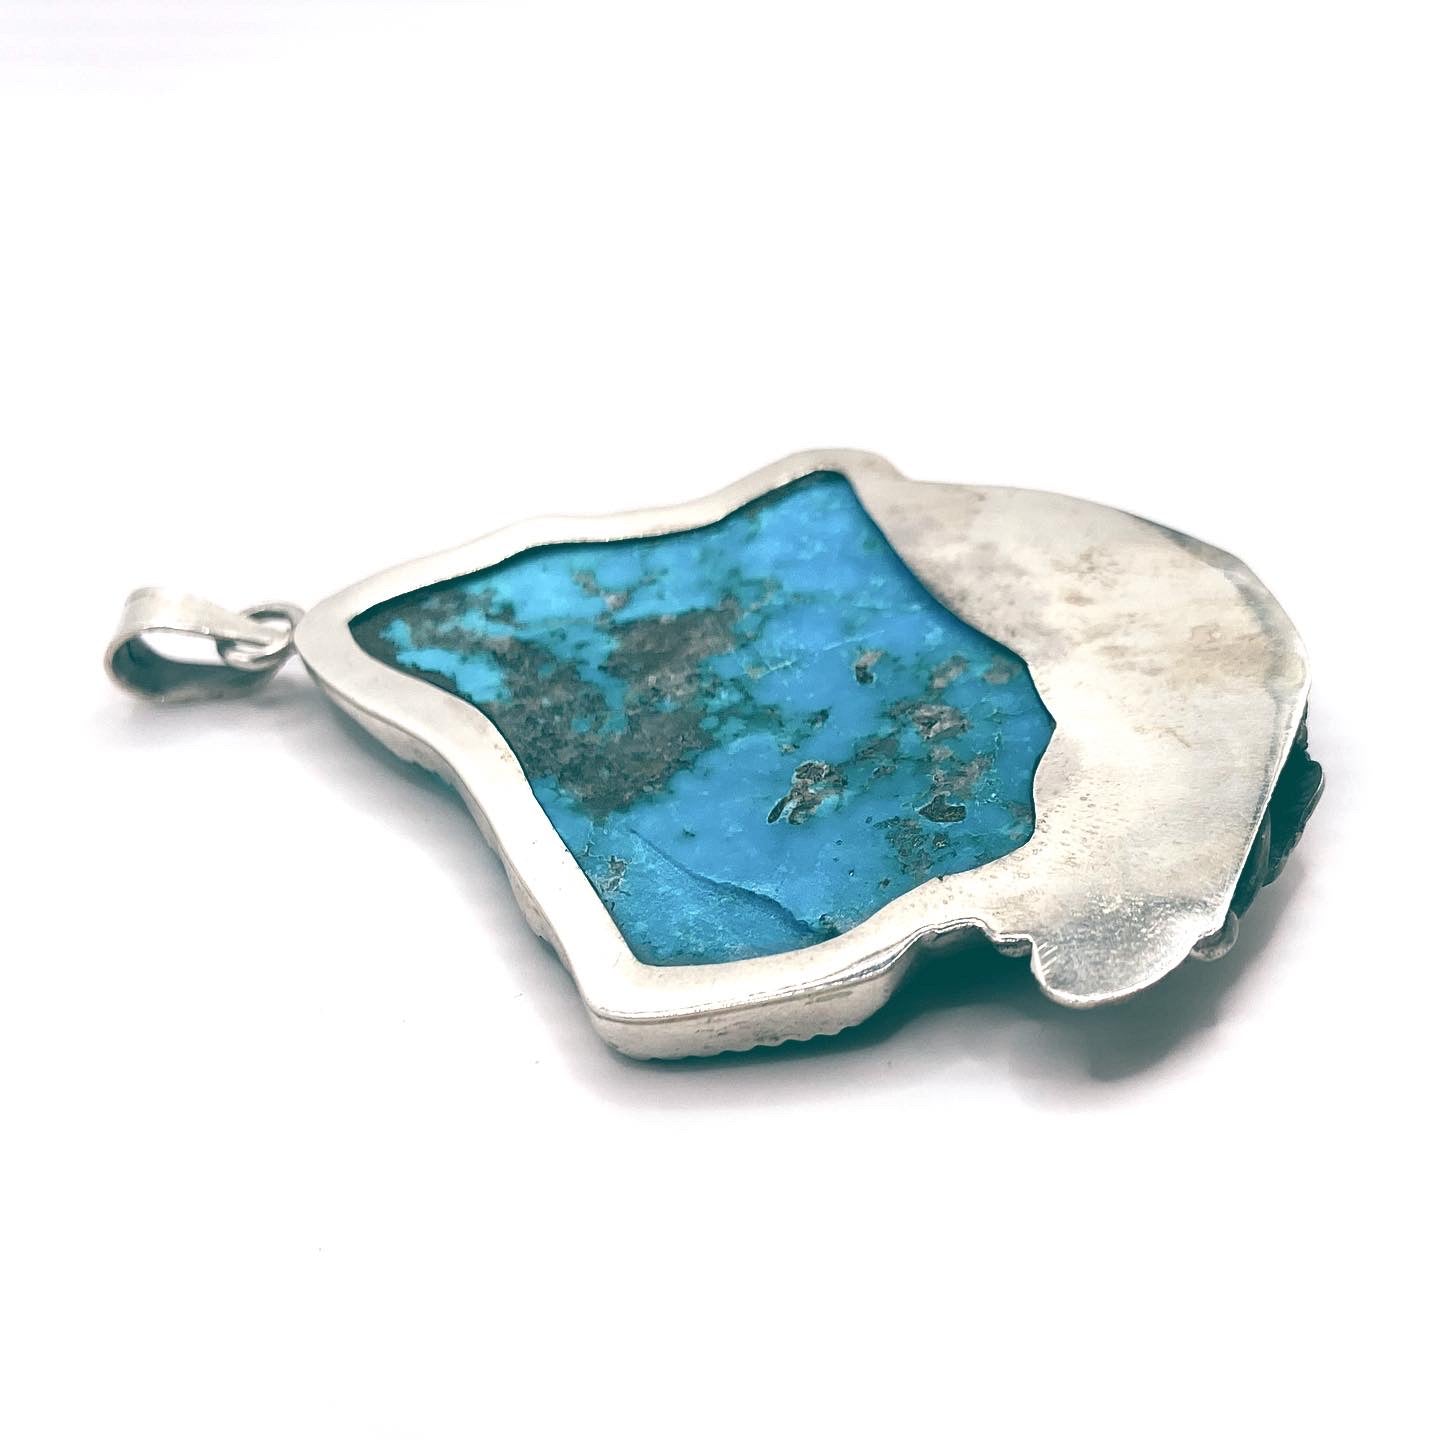 Handmade Sterling Silver925 pendant with turquoise